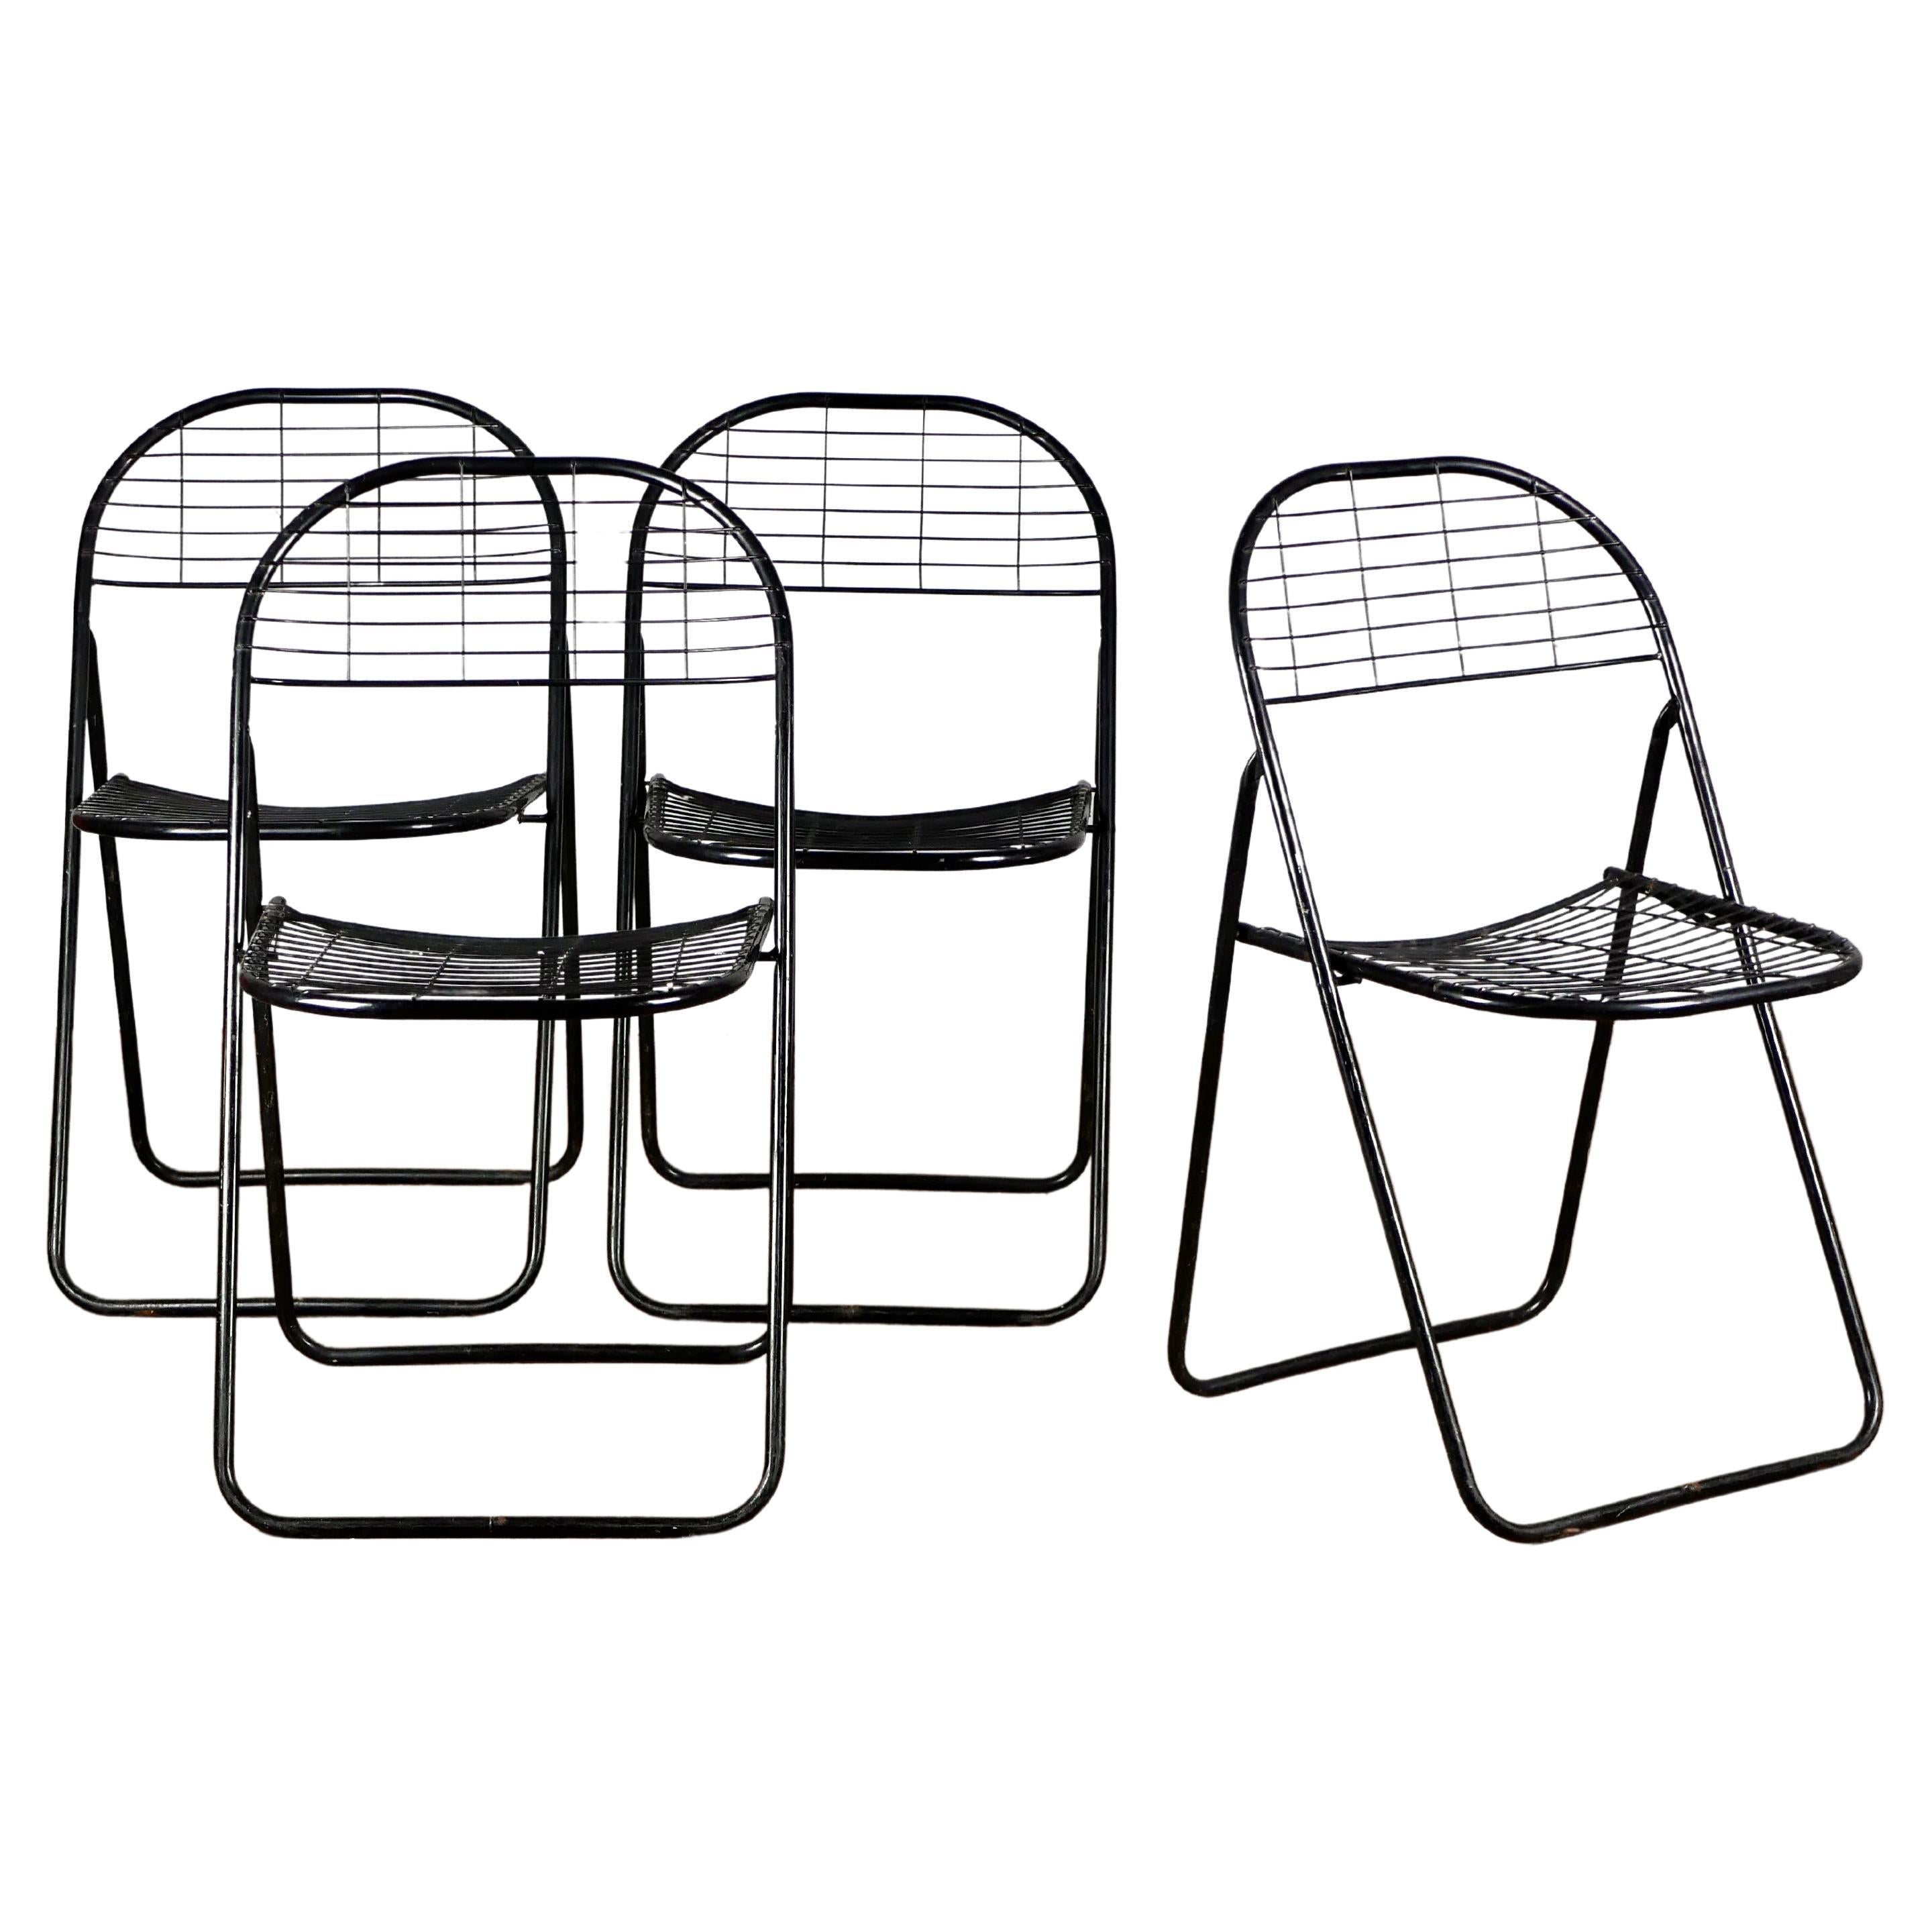 Set of 4 Black Folding Chairs by Niels Gammelgaard for Ikea, 1980s